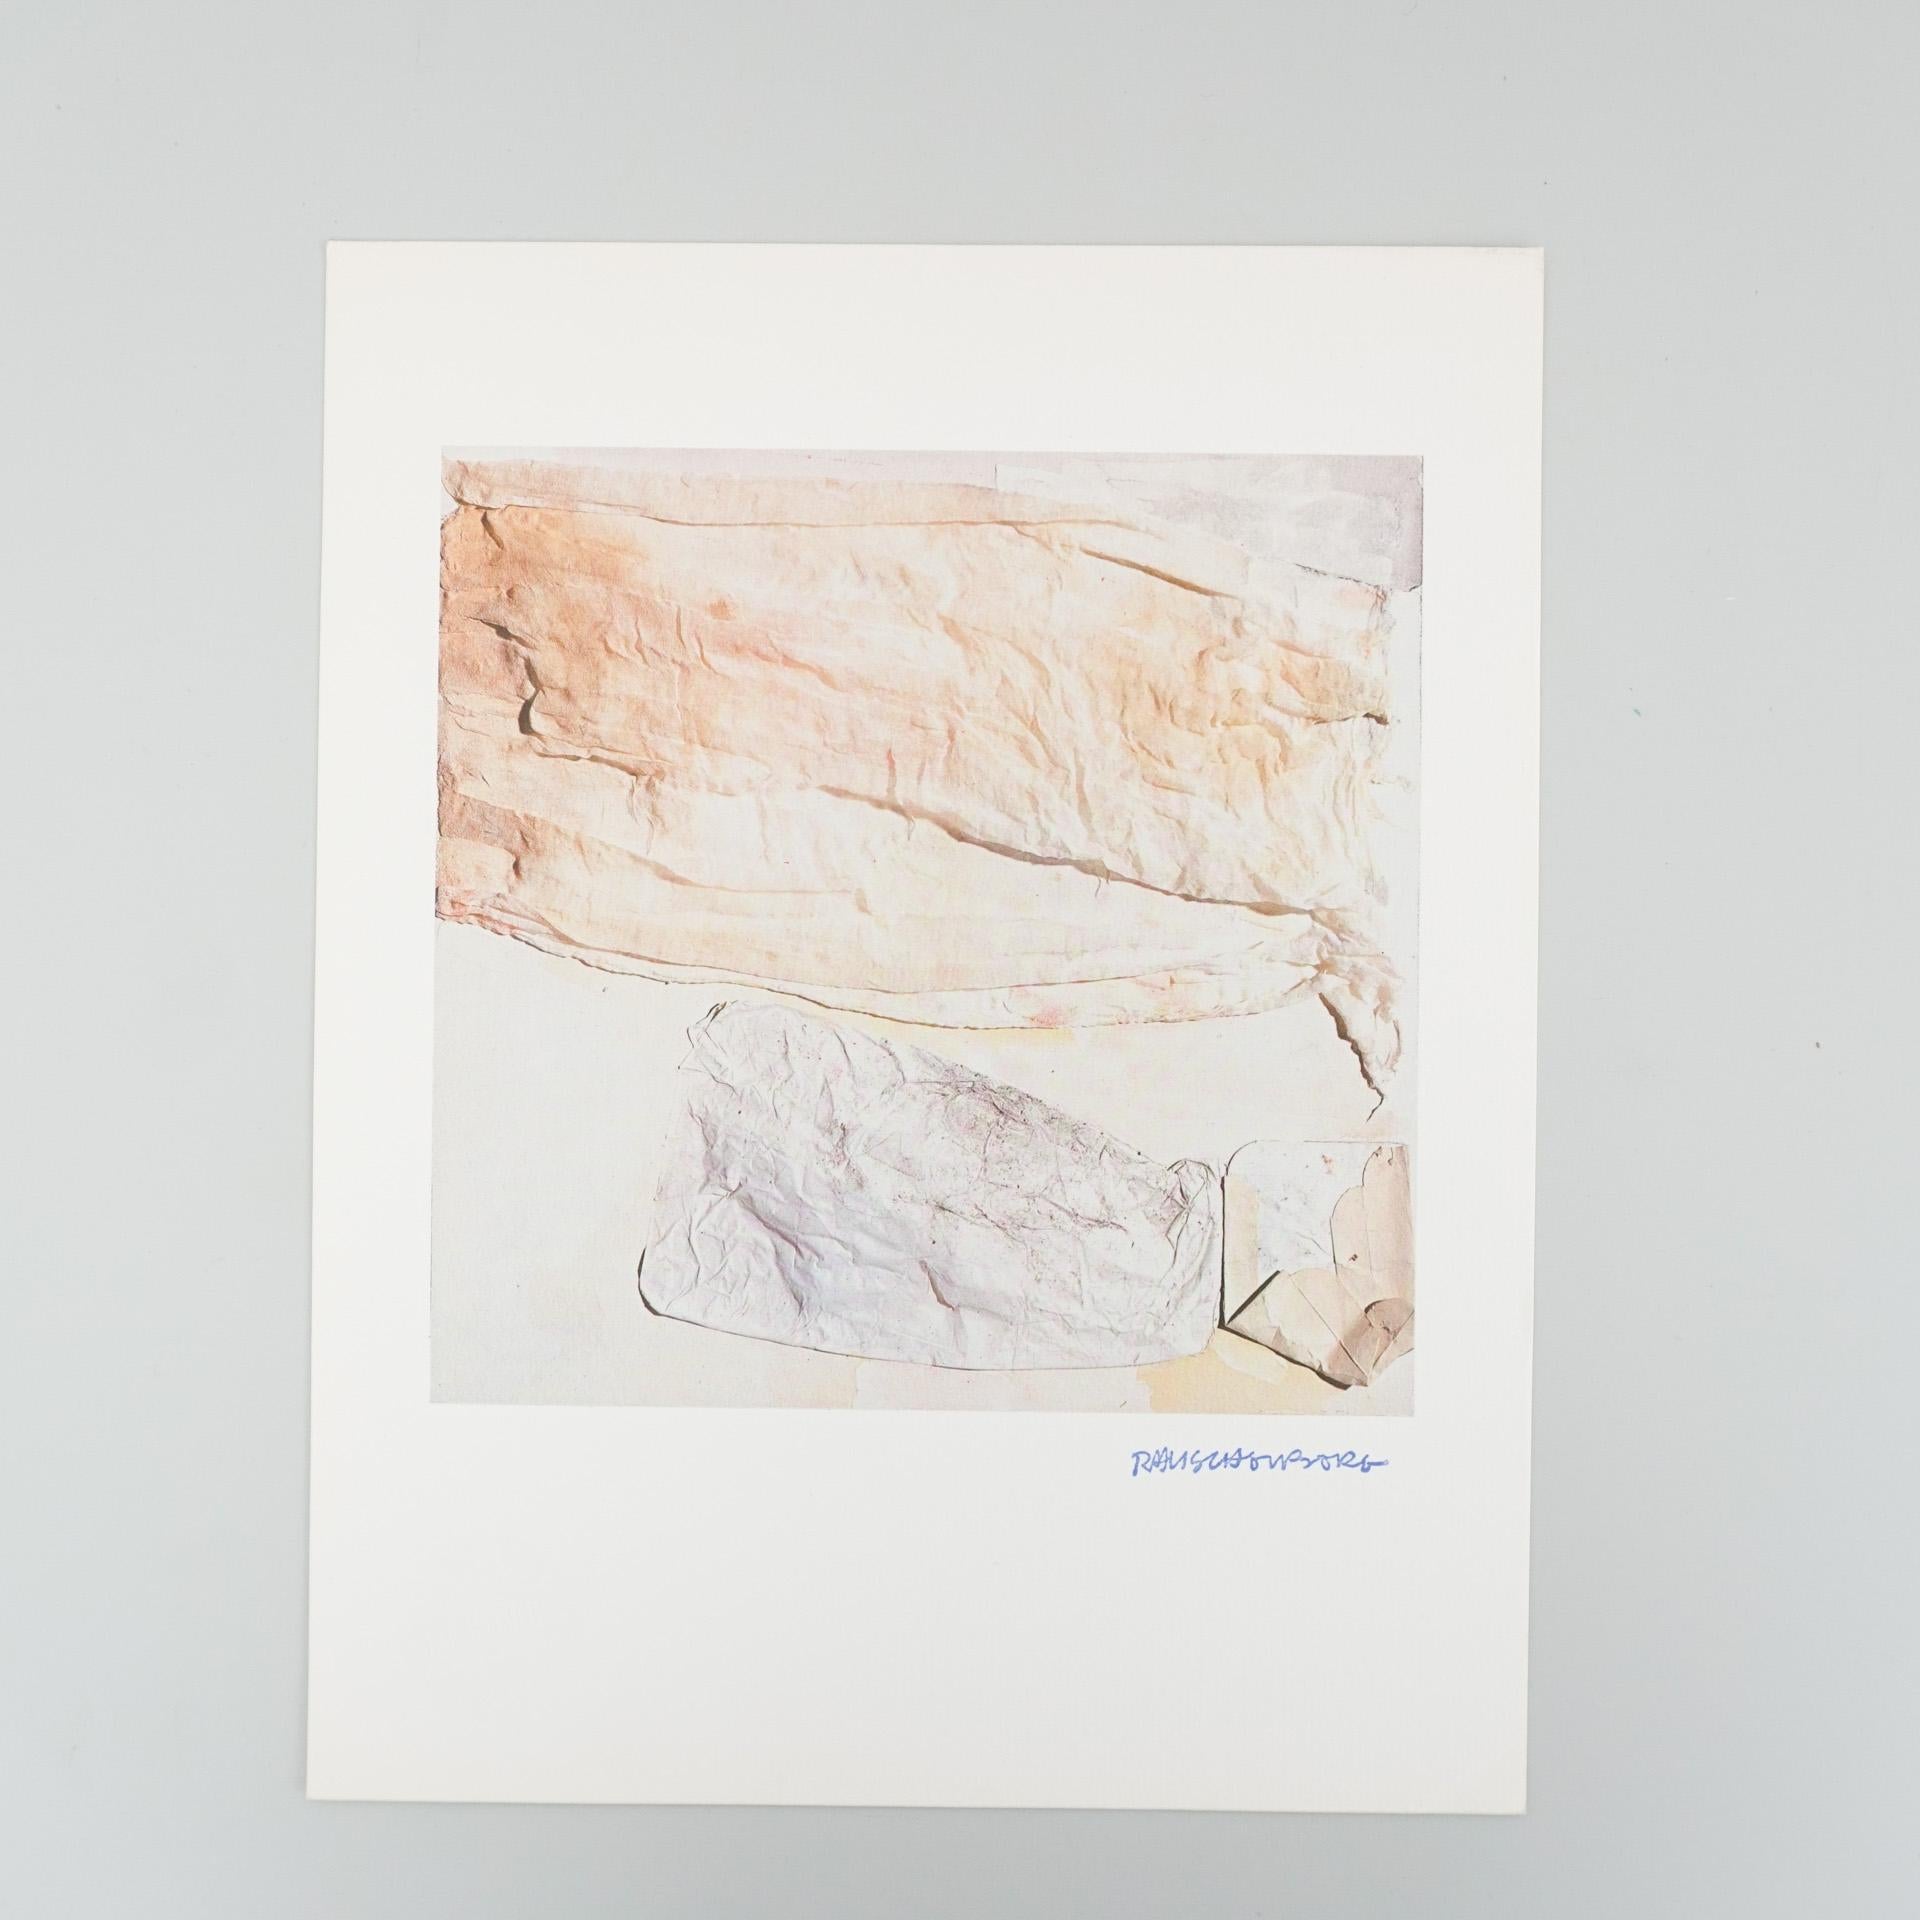 Rauschenberg, Limited Edition Photolithography, circa 1970 For Sale 3